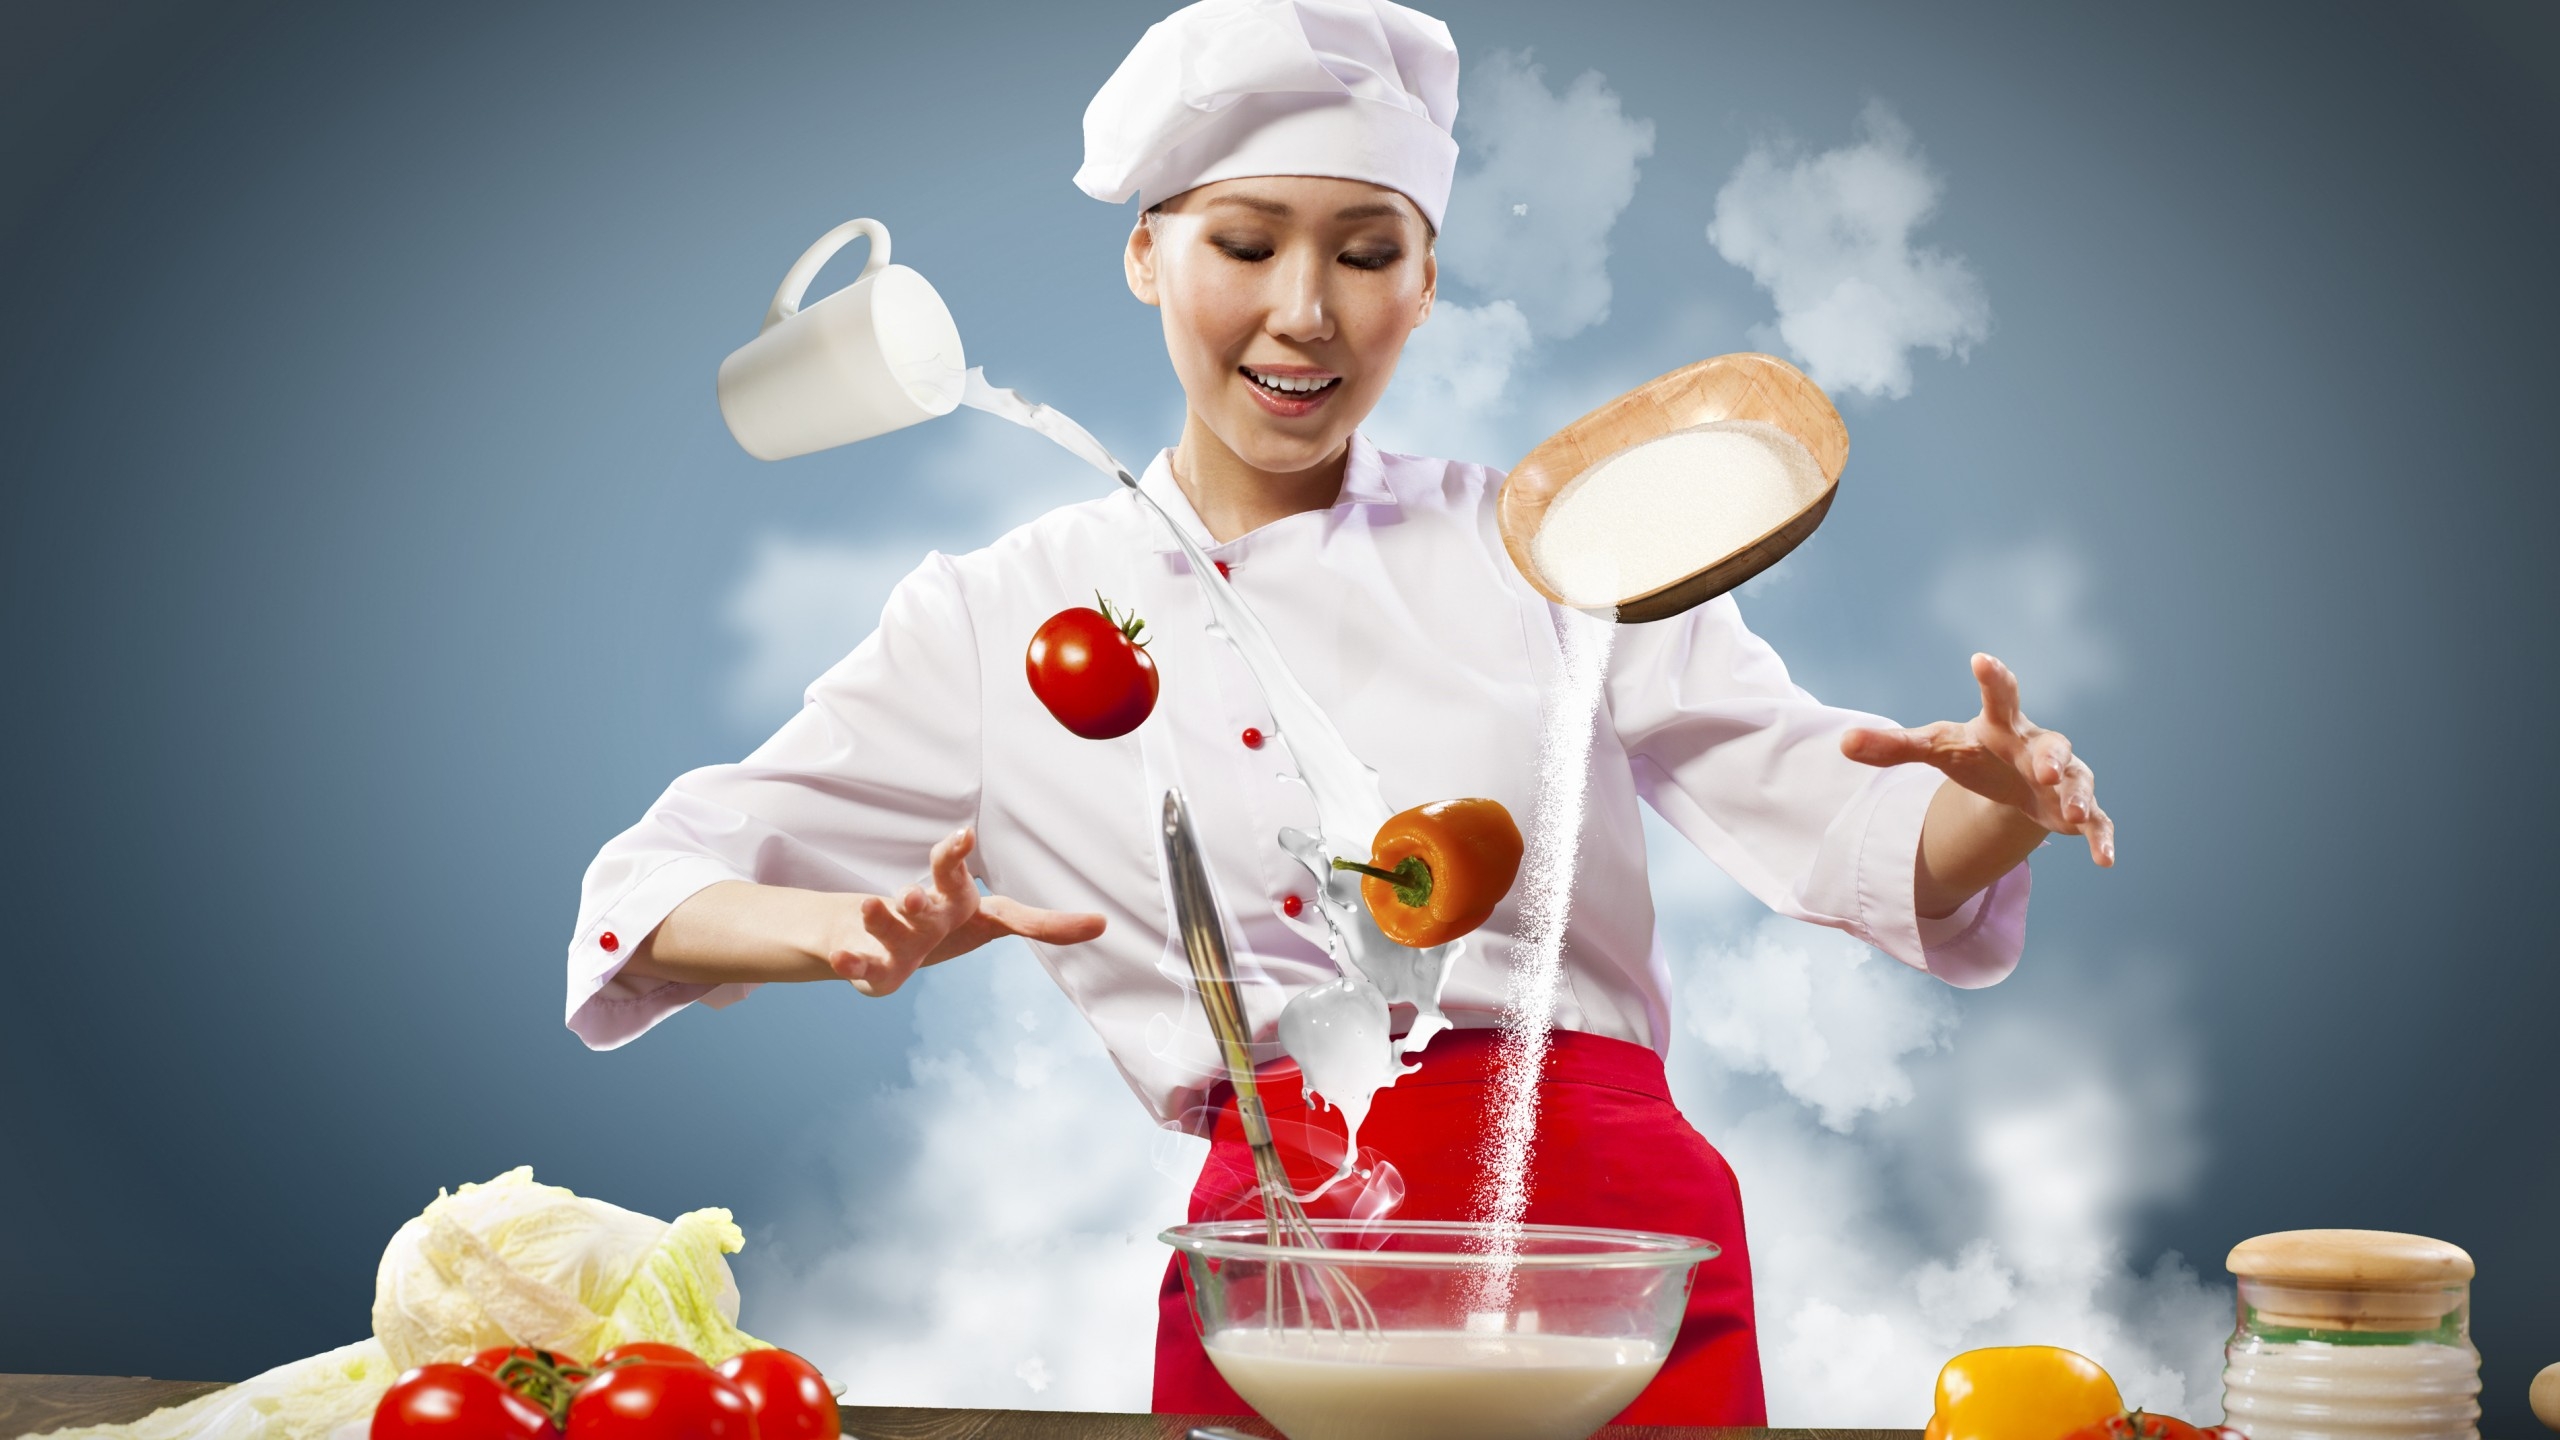 Cute Chef Wallpapers